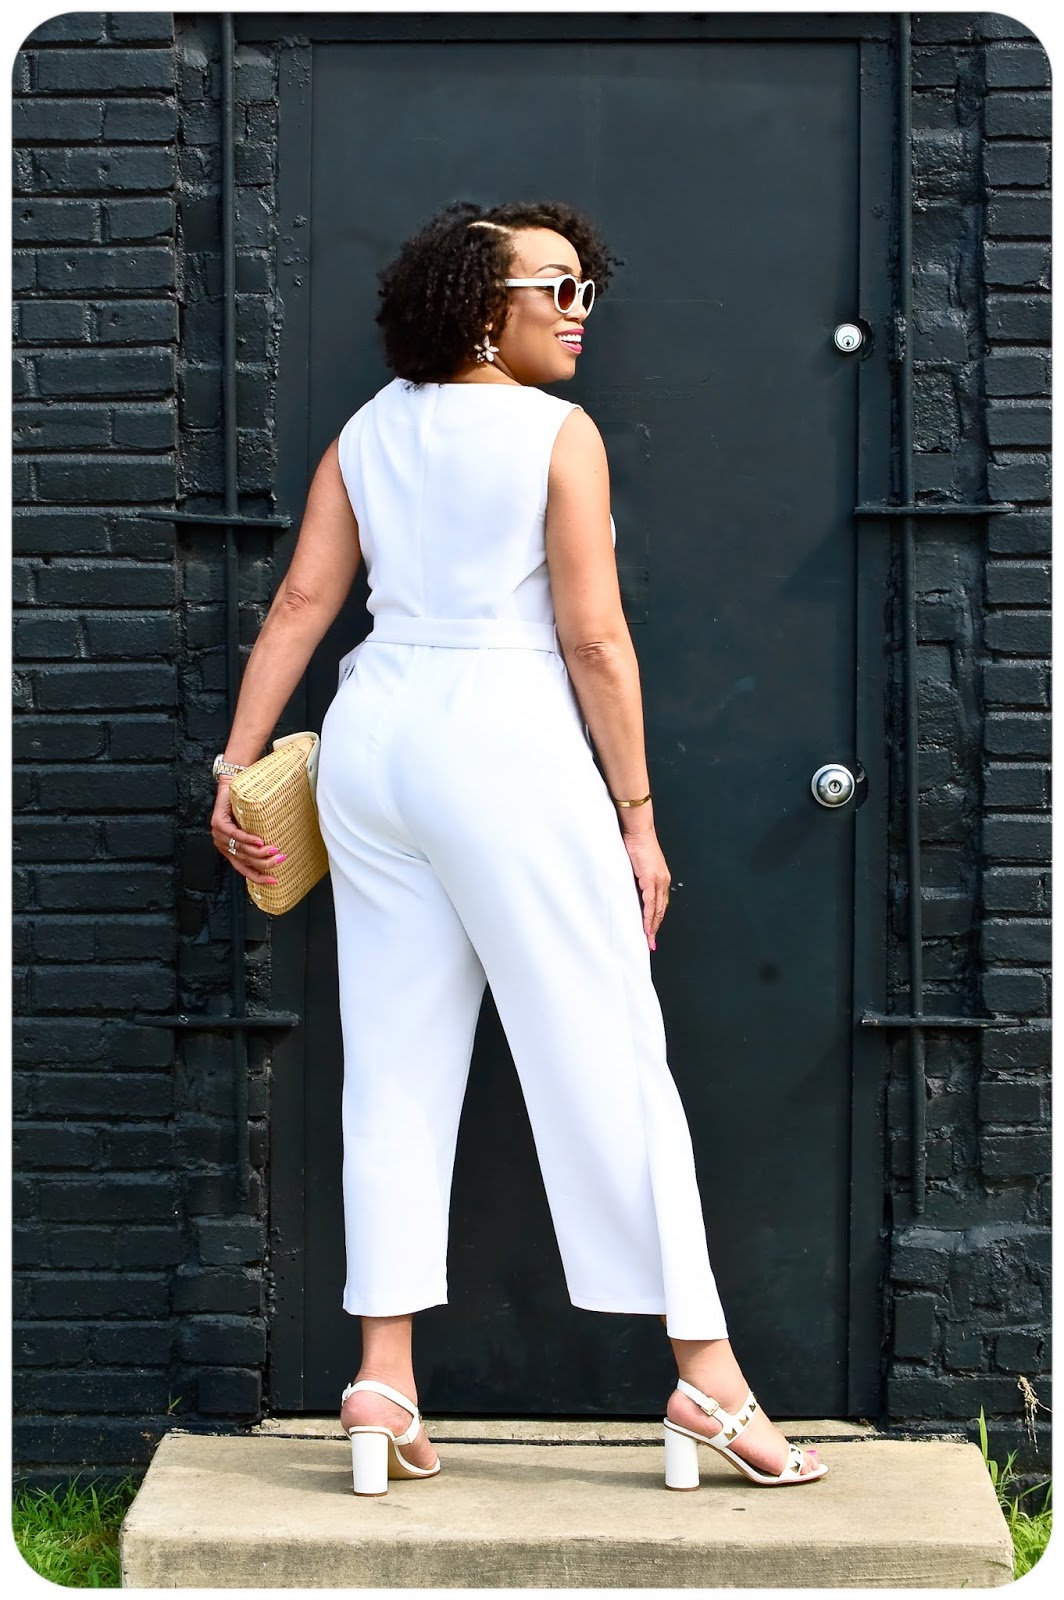 McCall's 7953 - White Crepe Wrap Jumpsuit - Erica Bunker DIY Style!